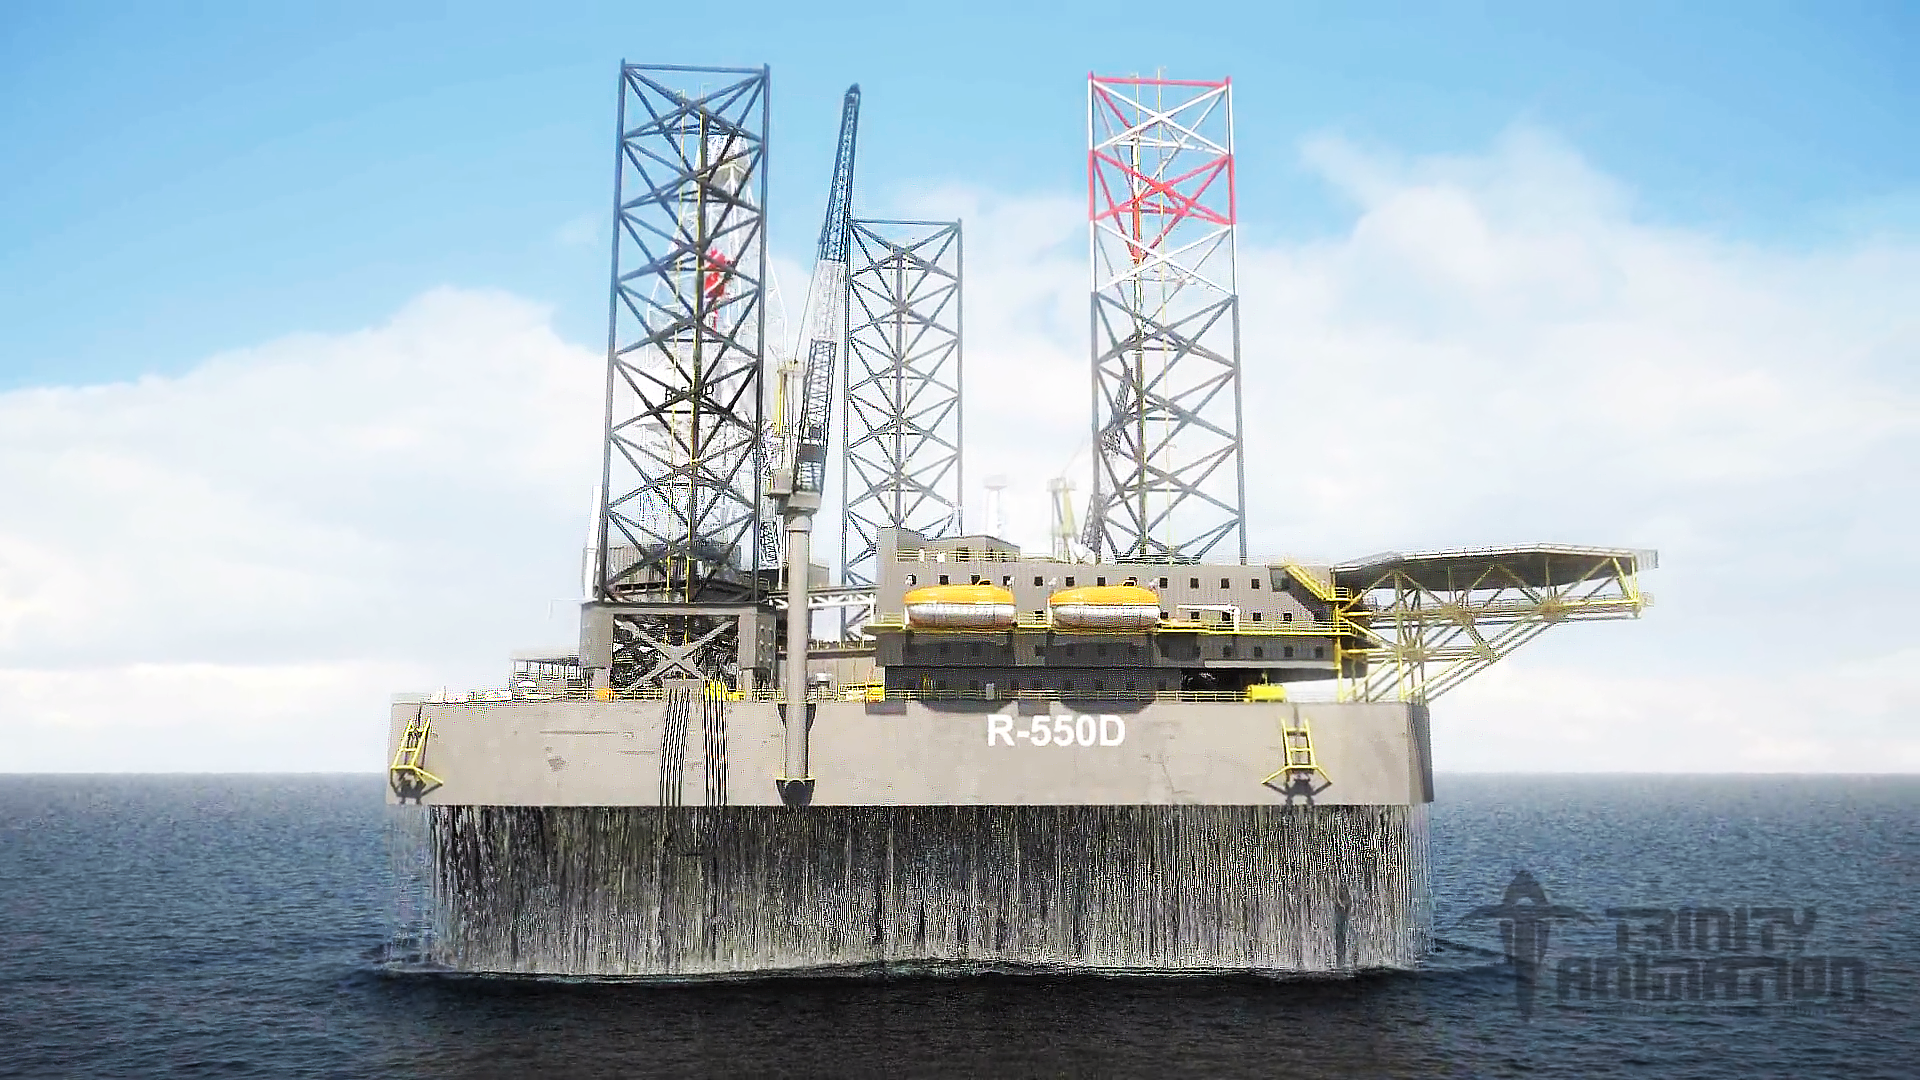 This is a 3D rendered image from Trinity's oil exploration animation - demonstrating how the Zentech Zenlock apparatus works. This image displays the Zentech Zenlock emerging from the water through the jackup system.